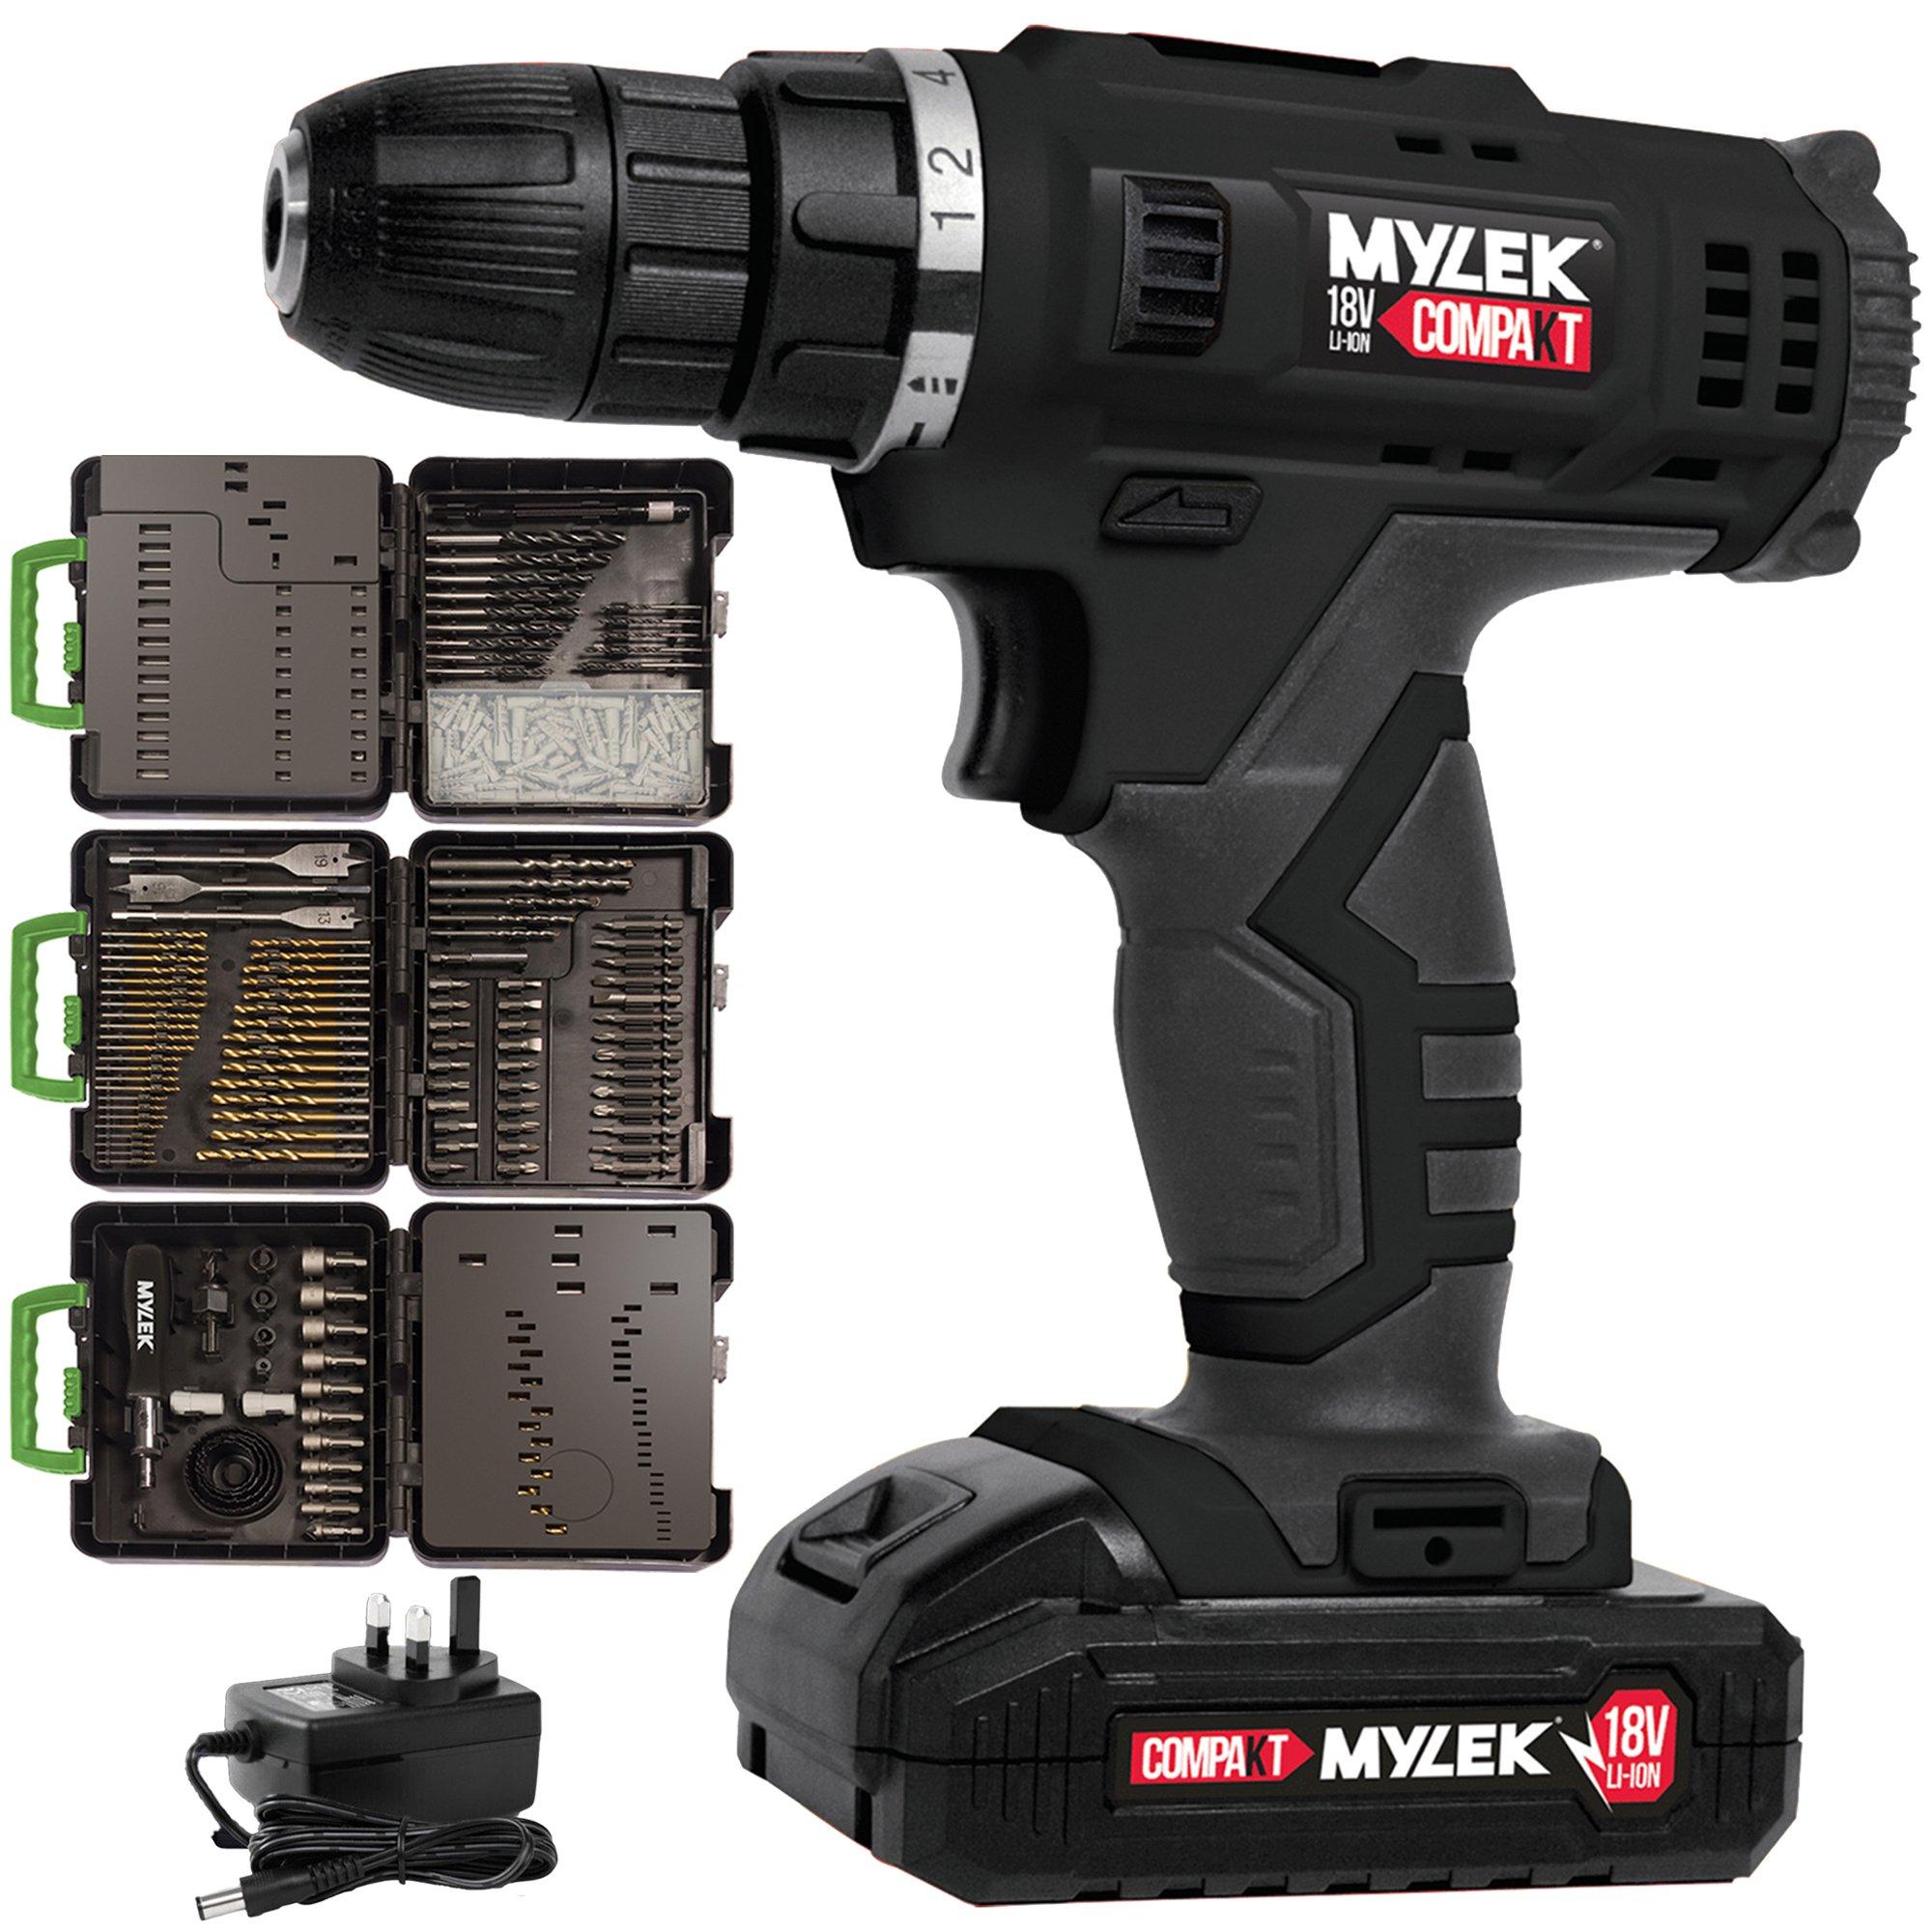 Cordless Drill MYW09 with 204-Piece Accessory Kit